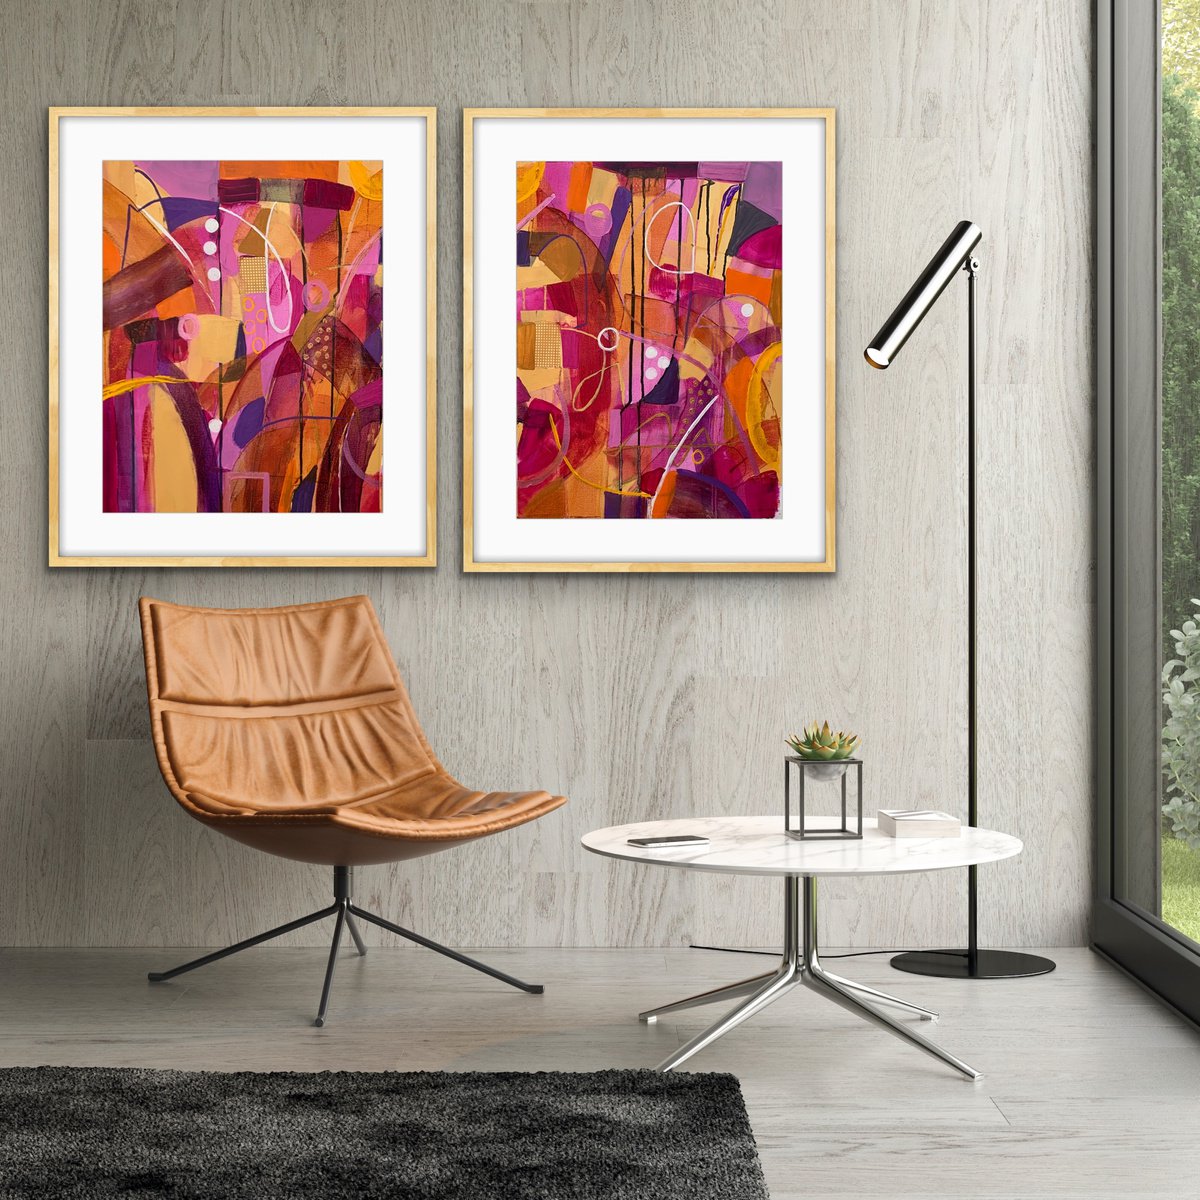 Look at Us Now- (Diptych) by Rashna Hackett